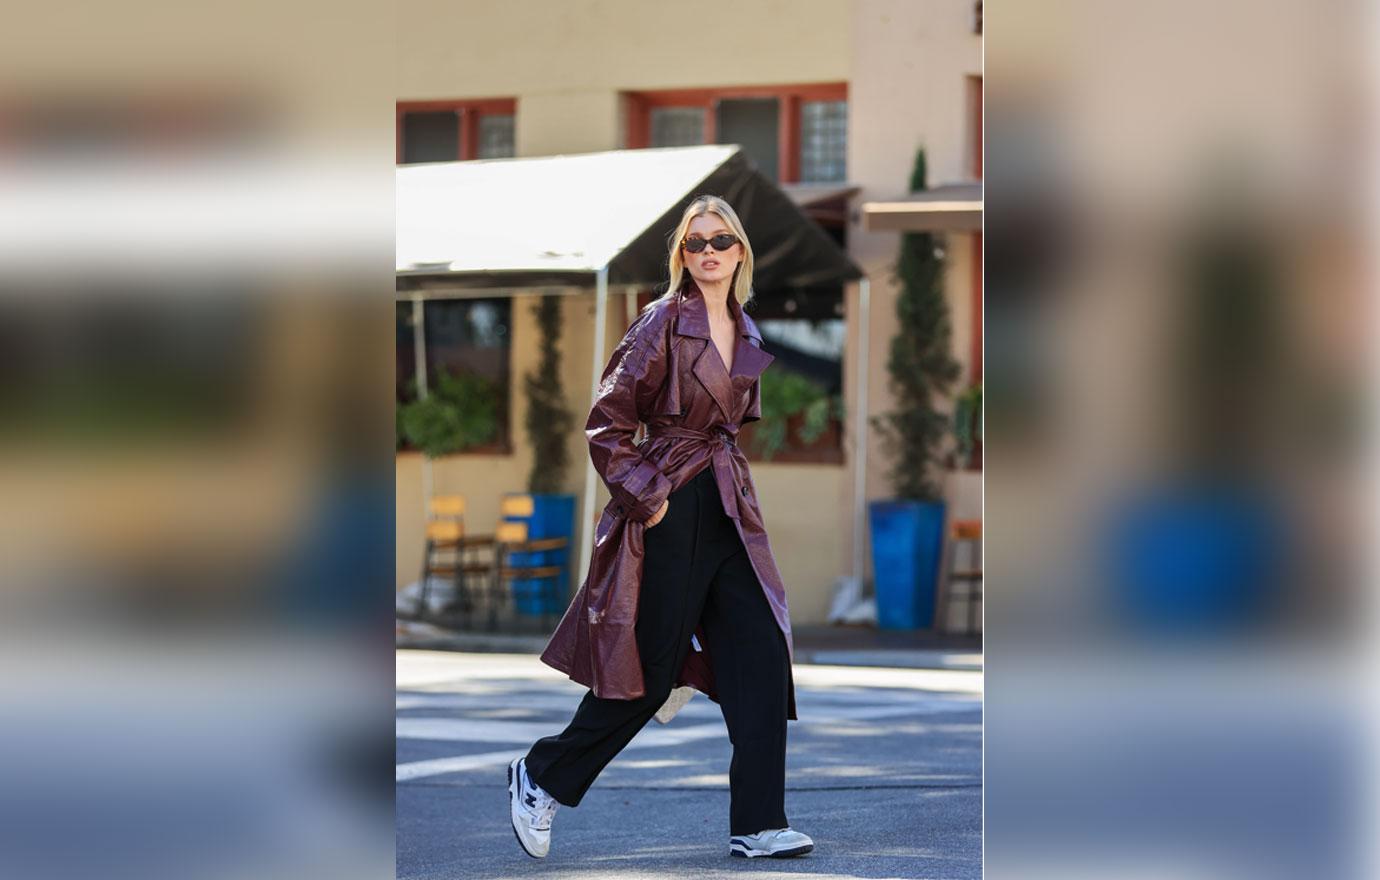 Marais - Model Elsa Hosk is seen strutting the Tan Puzzle Bag from LOEWE  while out and about. Make this statement and iconic bag yours with a range  of vibrant styles to